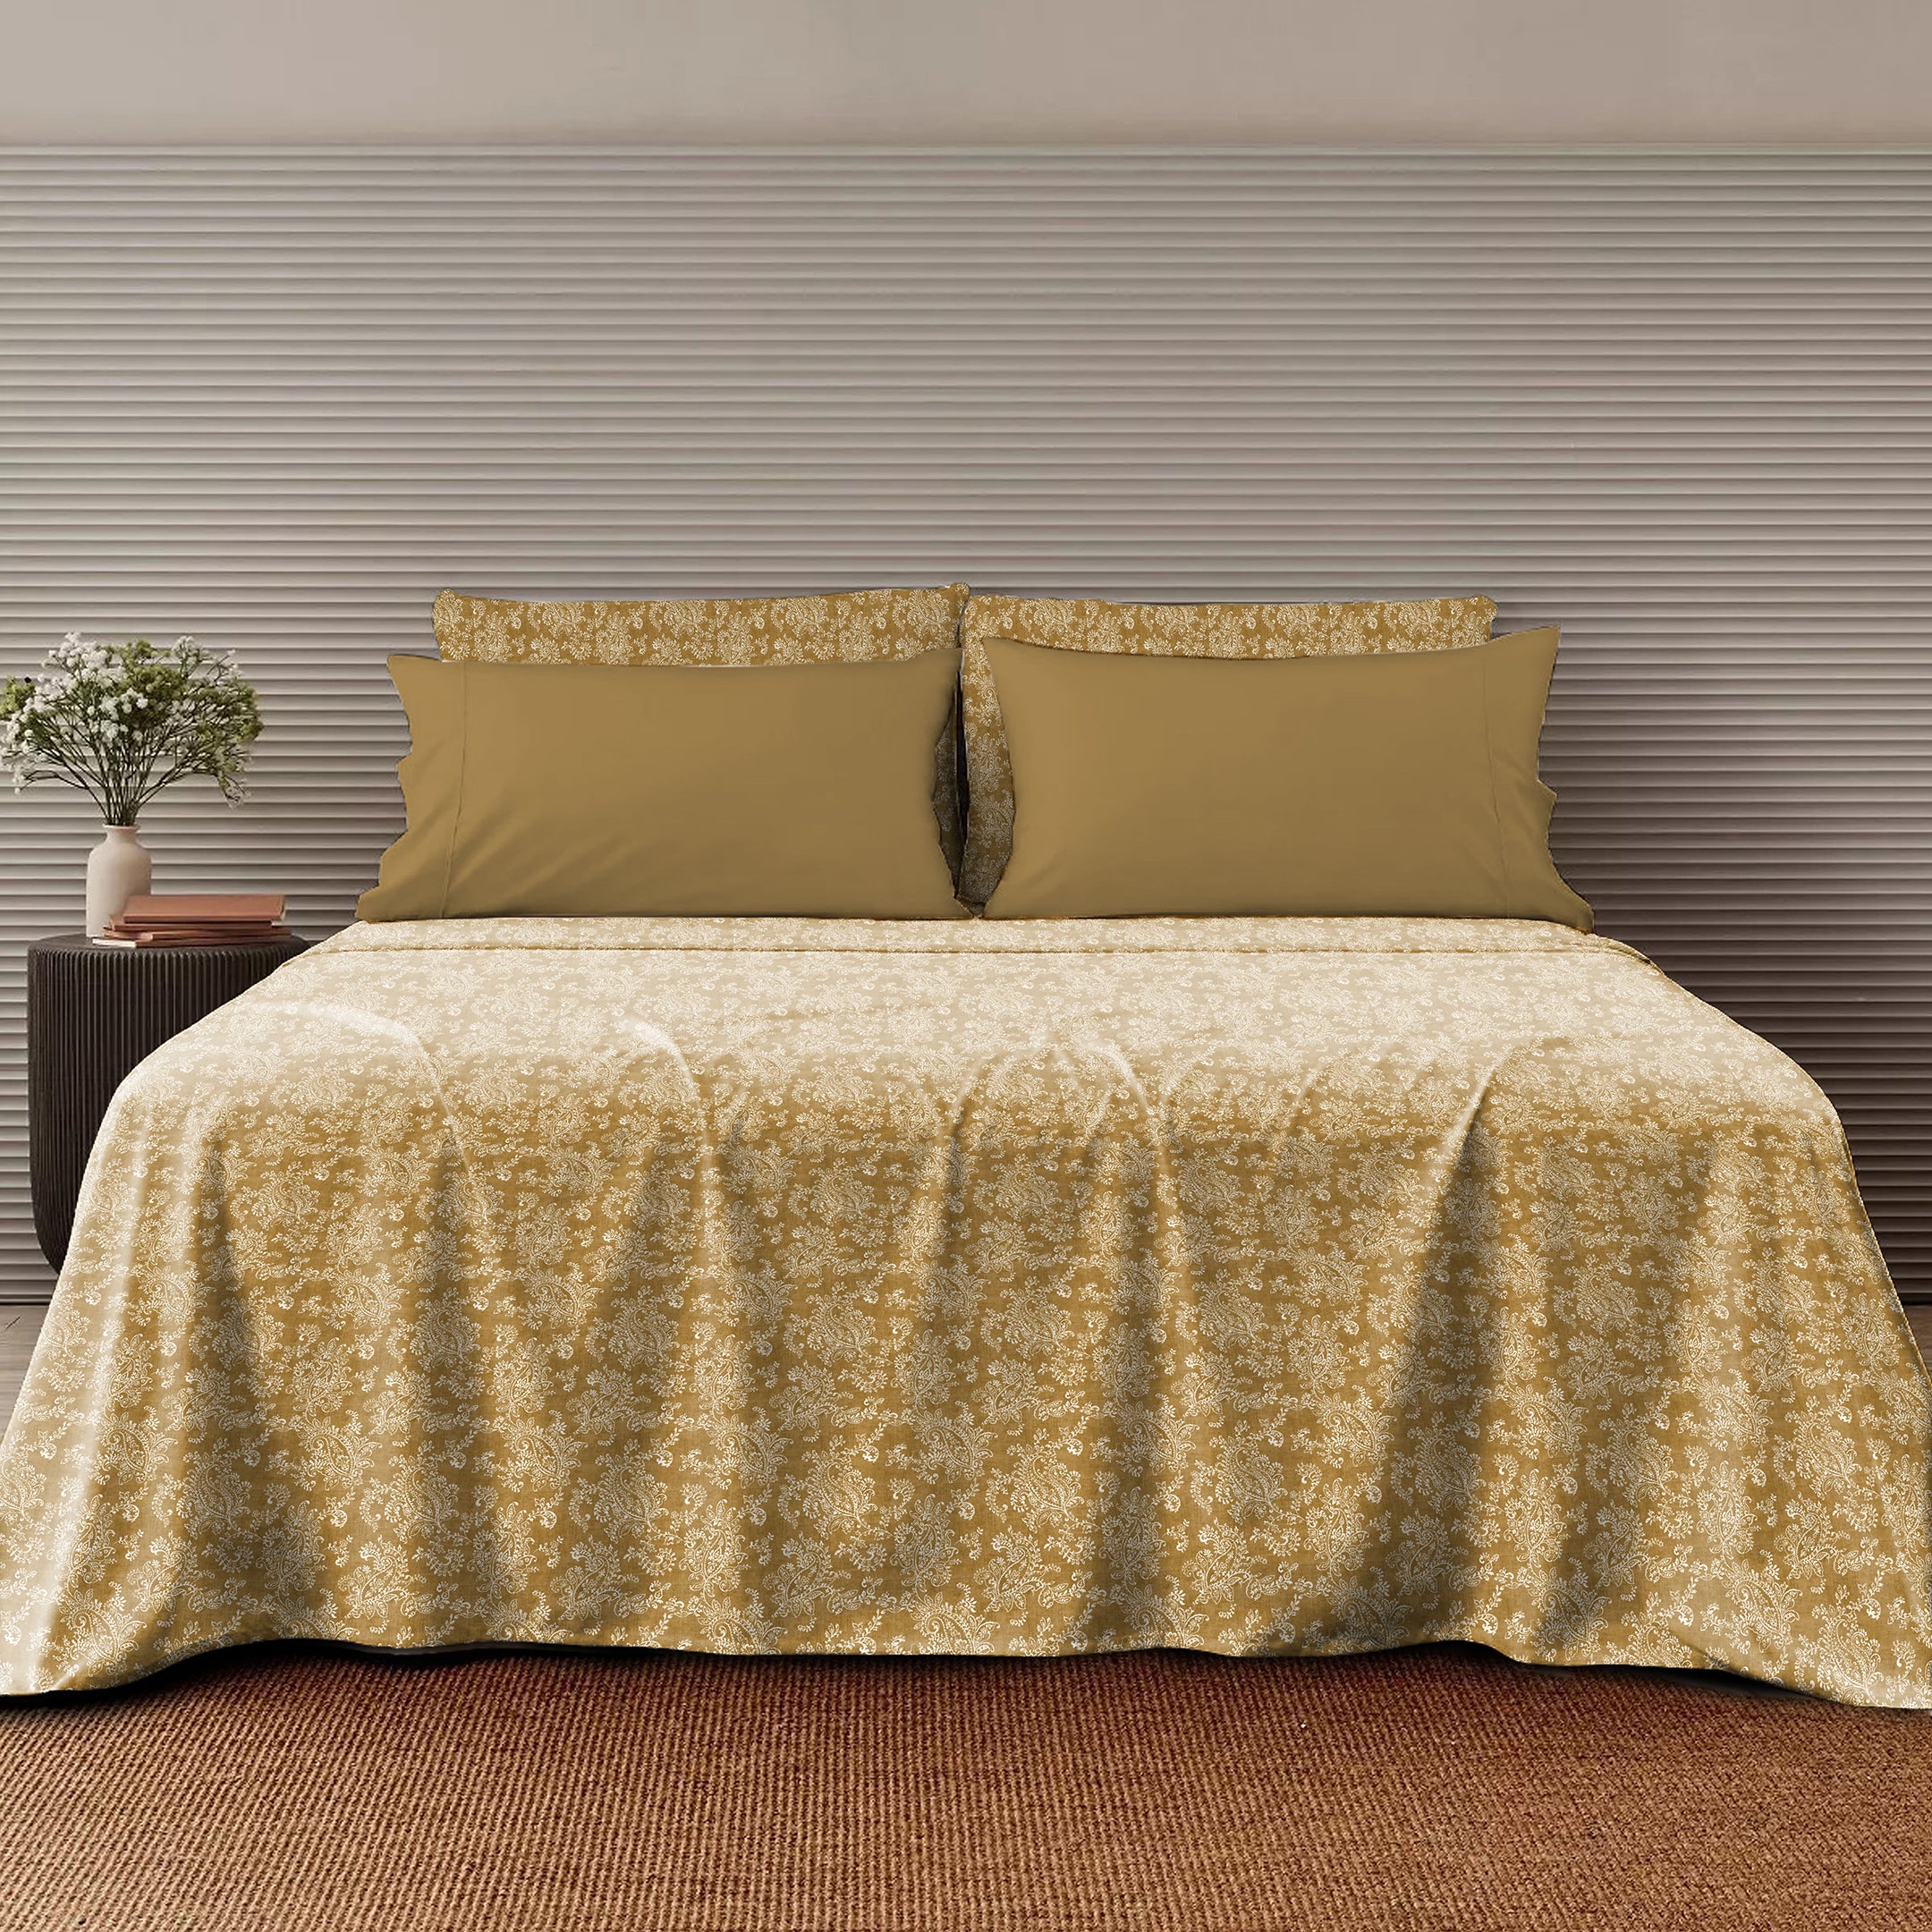 Jodhpur Flowers Bedsheet for Double Bed with 2 PillowCovers King Size (104" X 90") Camel